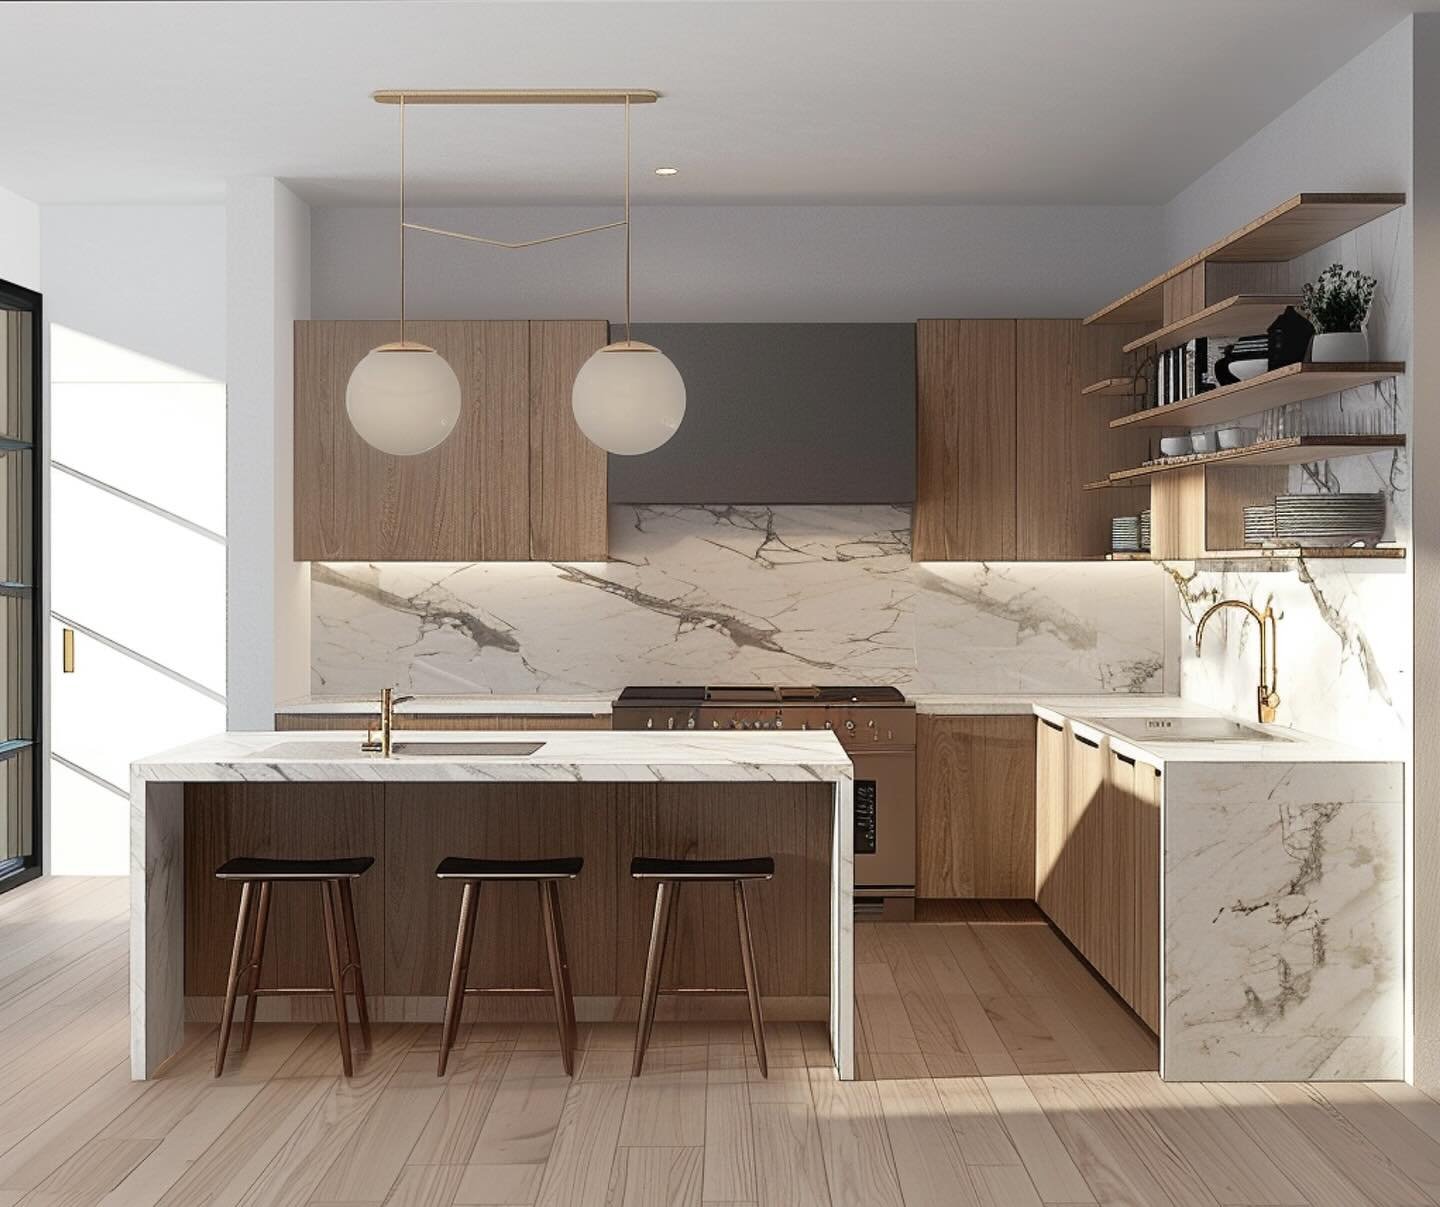 Working on an apartment renovation and sharing say some of the prior concepts we came up with.
-
-
-

#kitchendesignideas #nyckitchen #kitchendesign  #archilovers  #nycinteriors #interiors #architect  #interiordesign #interiordecor #nycinteriors #dec